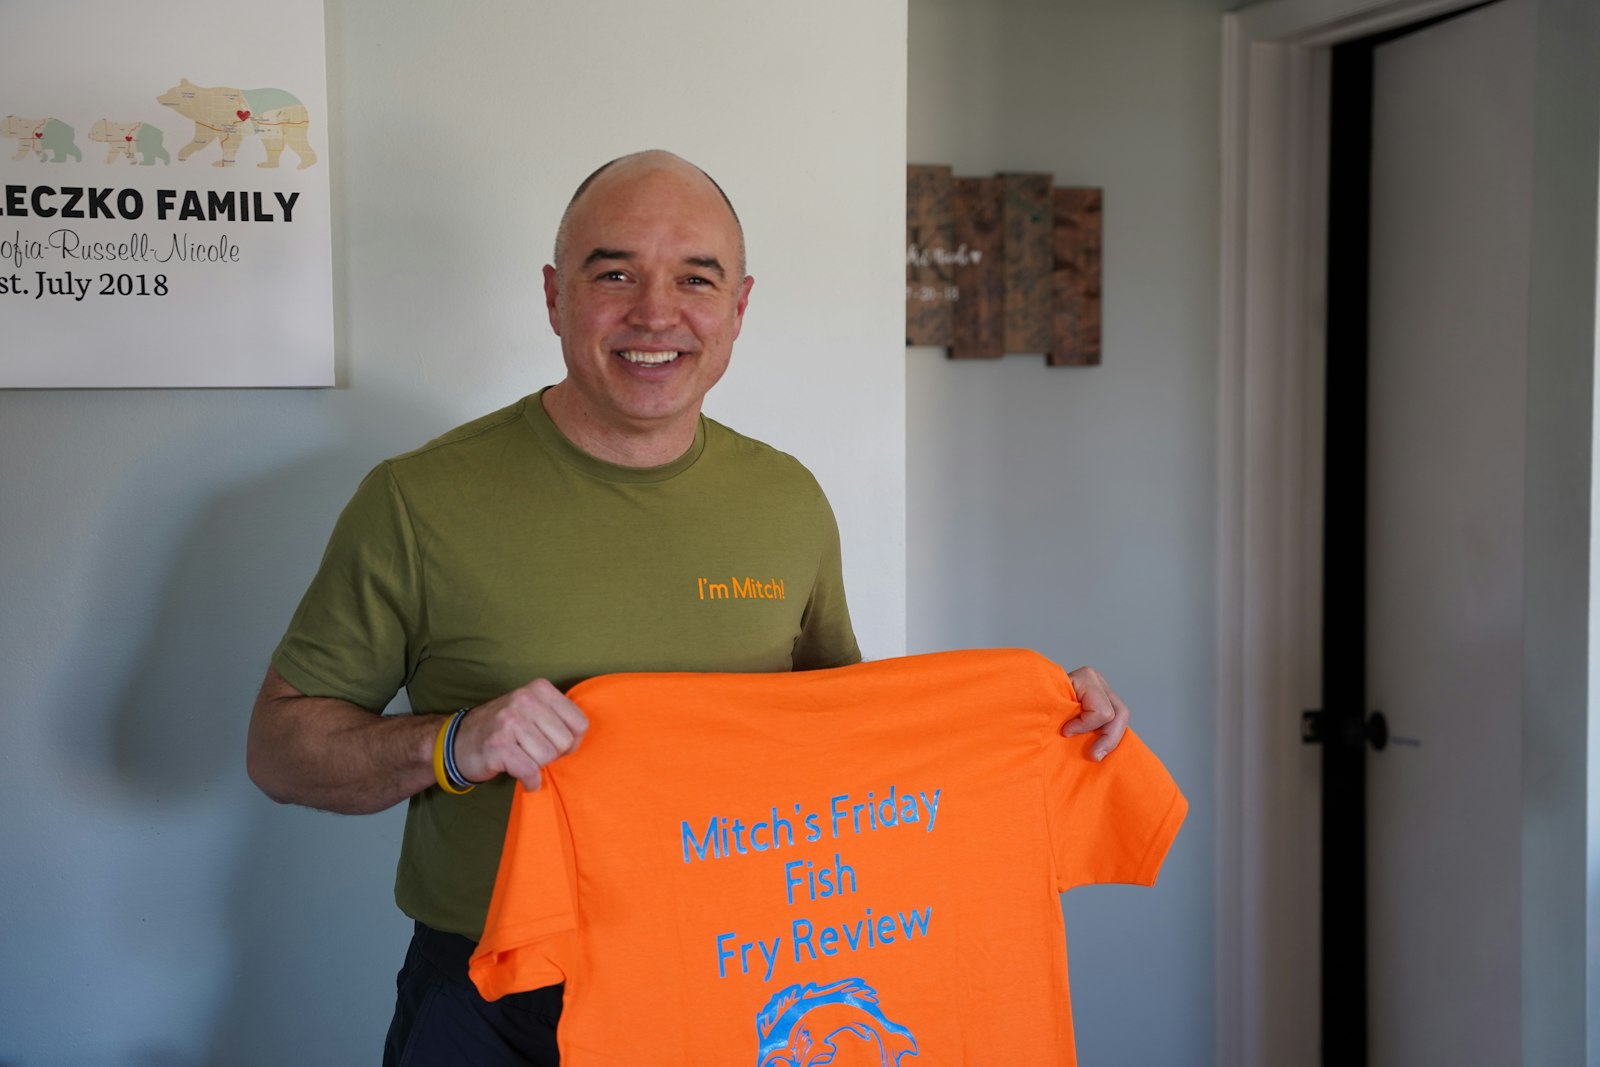 The success of Koleczko's reviews prompted him to make t-shirts to wear when he visits a new parish. So if people follow my page and recognize me, come up and say hi ﻿— I like meeting people,” he said.